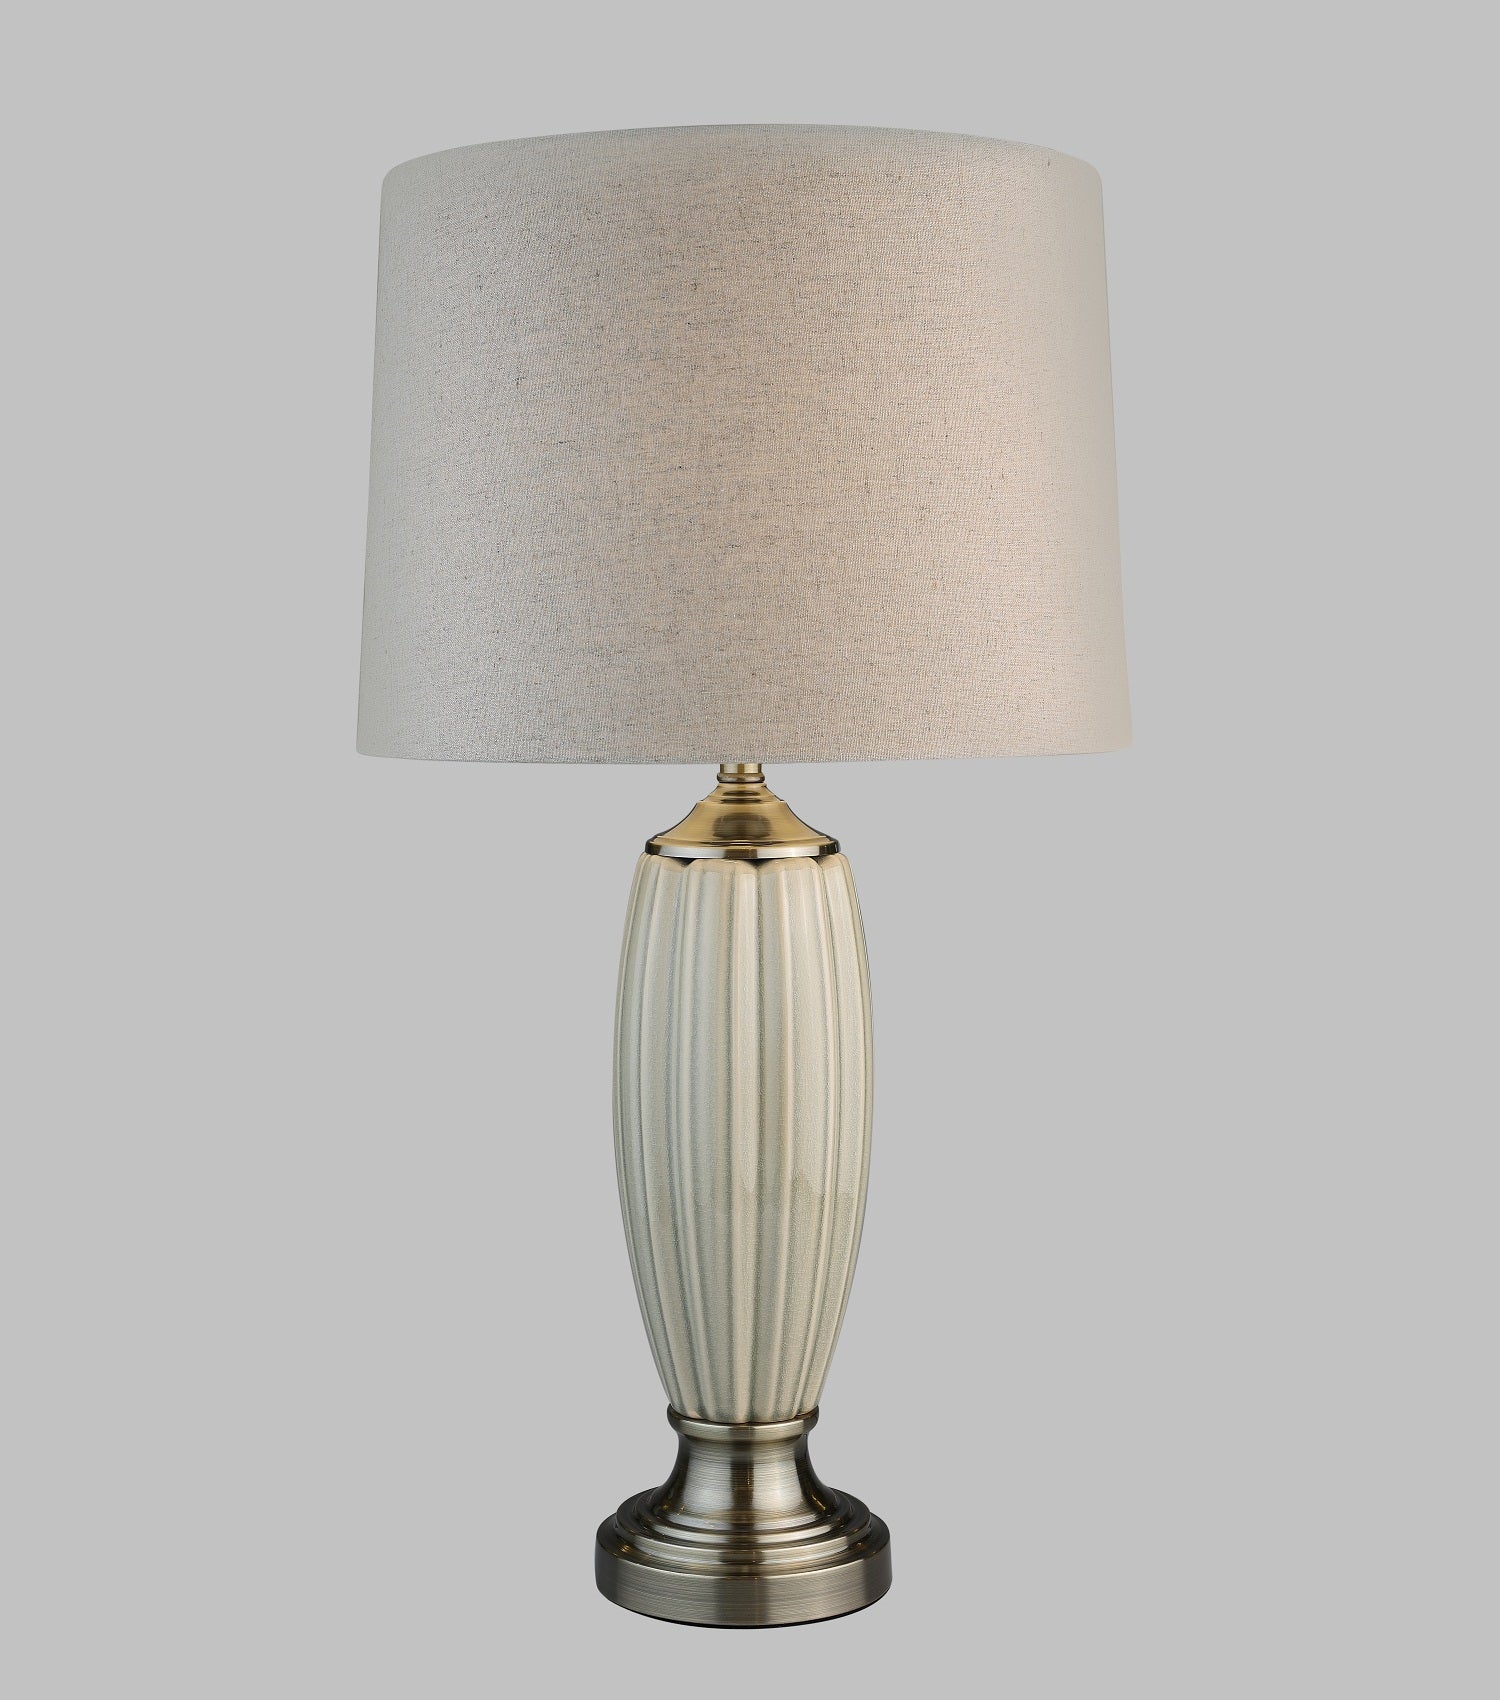 Celestial Taupe lamp